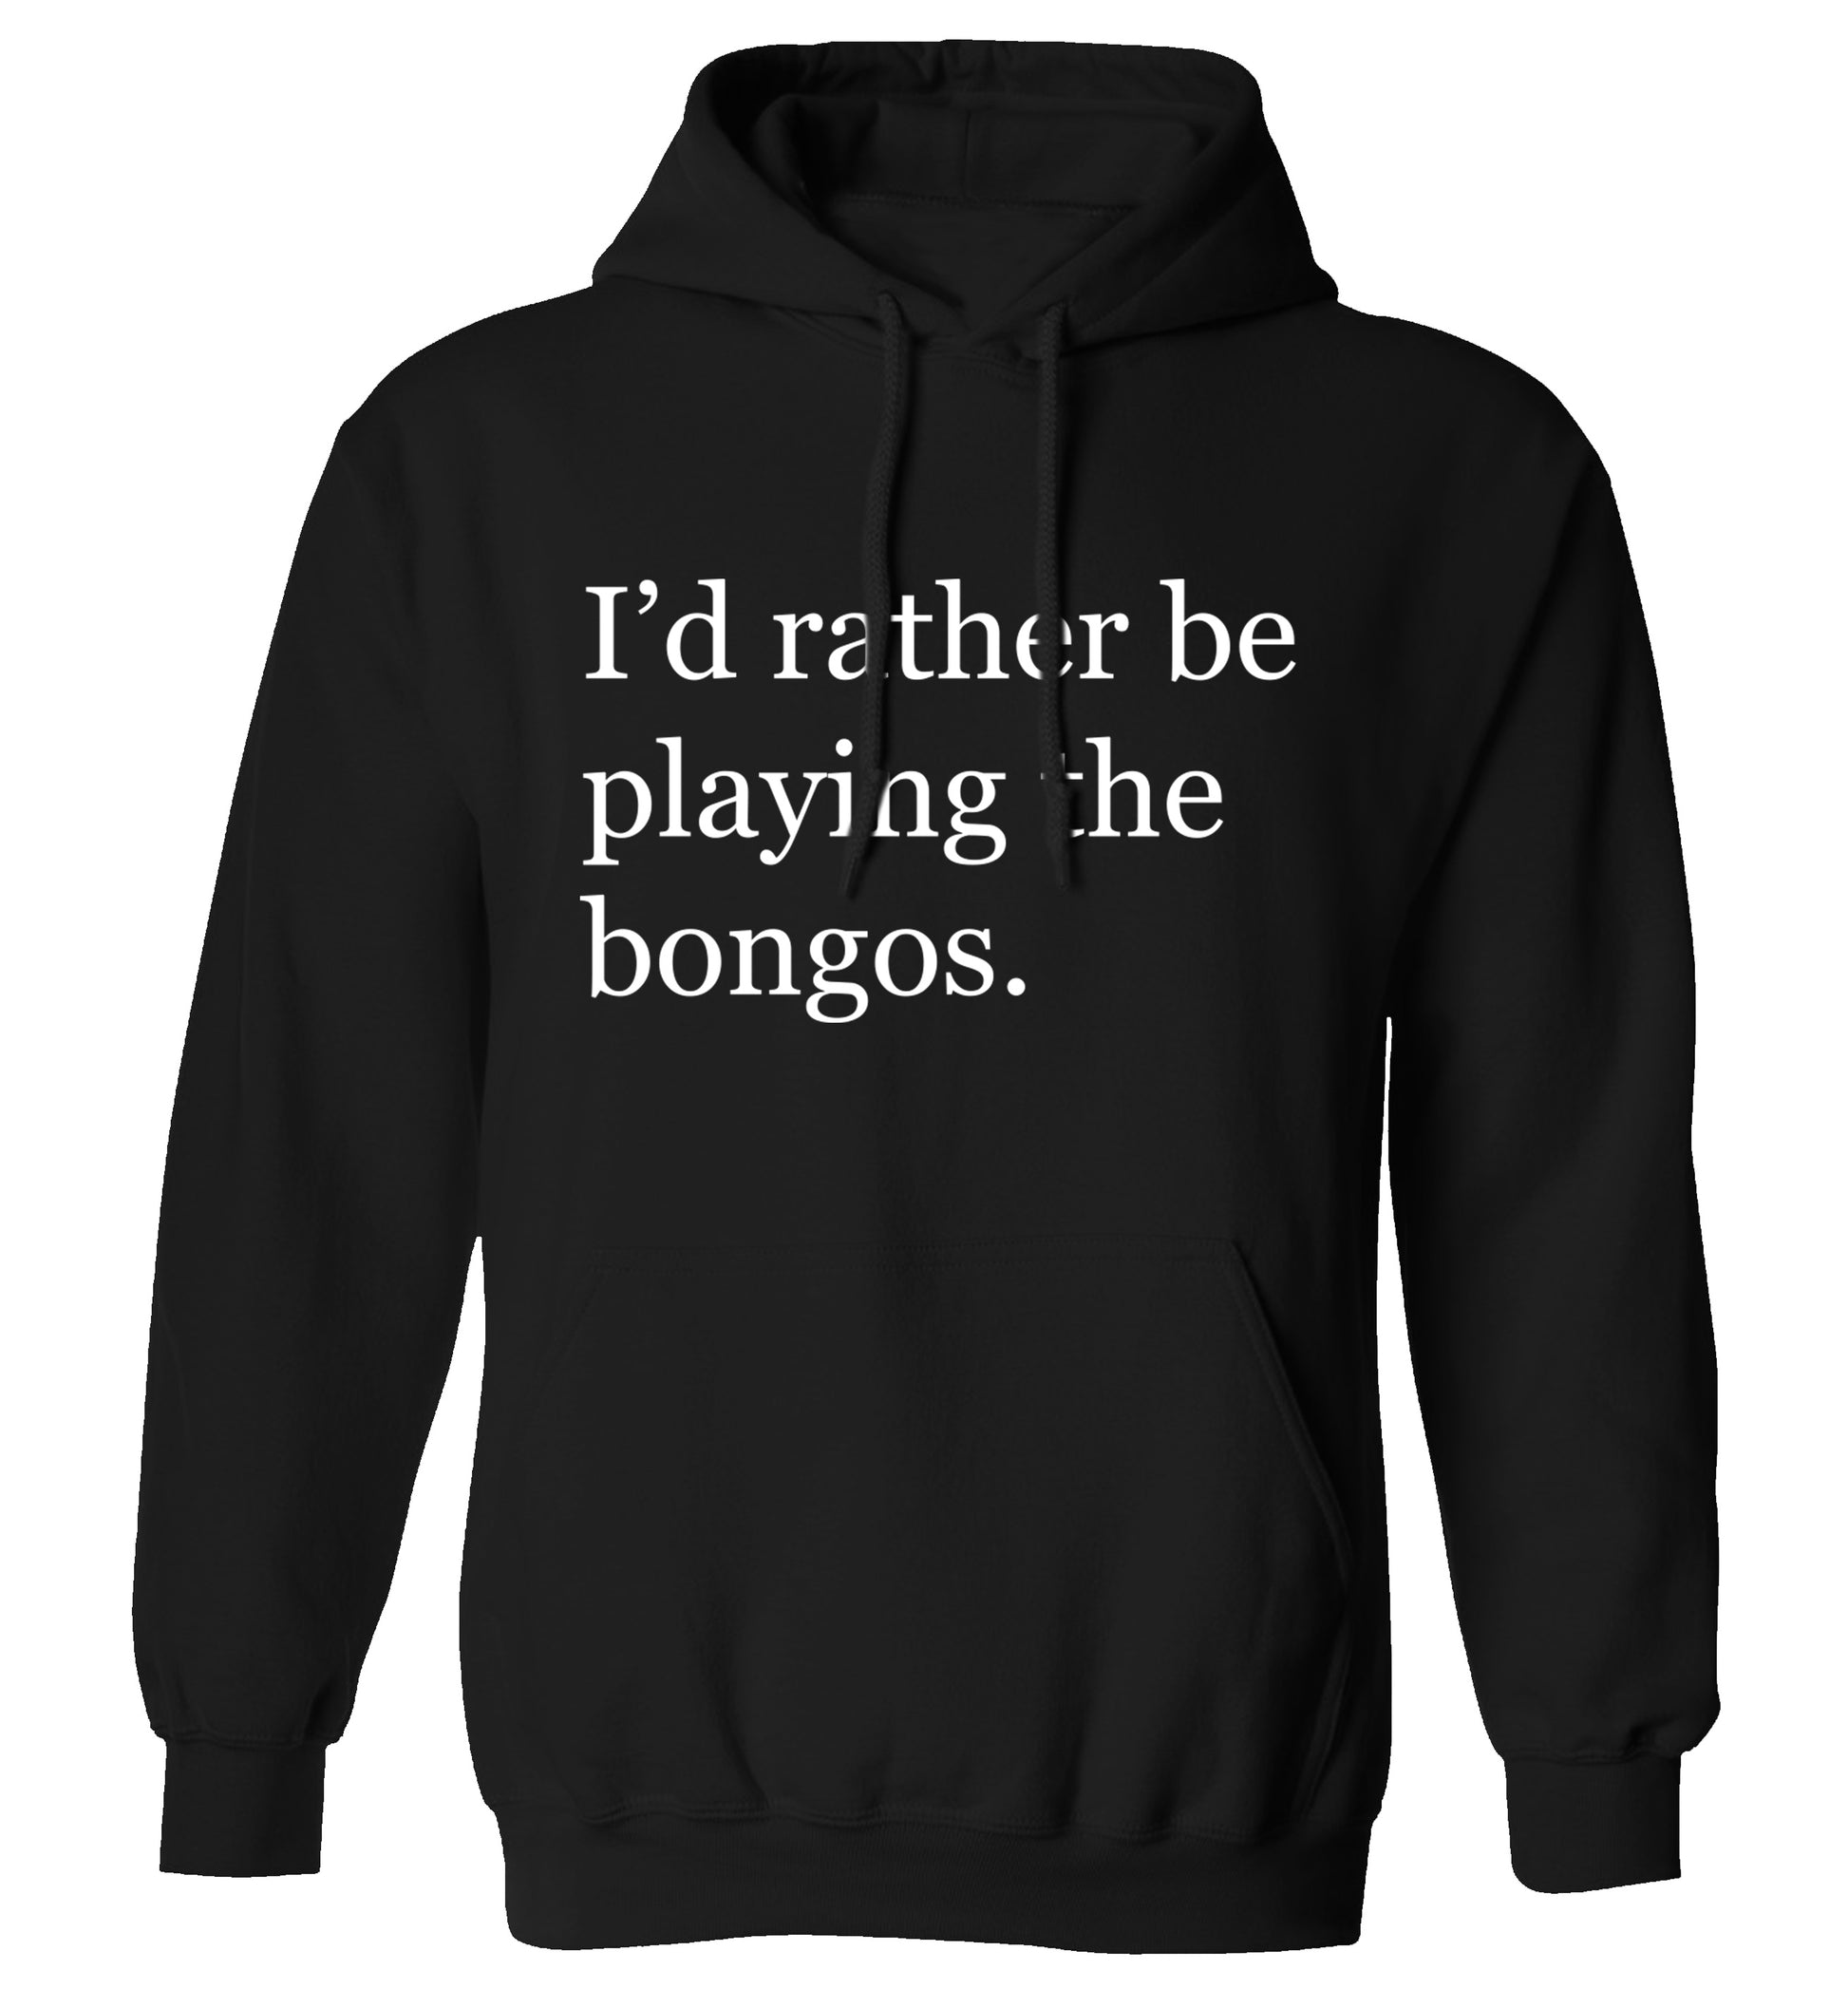 I'd rather be playing the bongos adults unisexblack hoodie 2XL